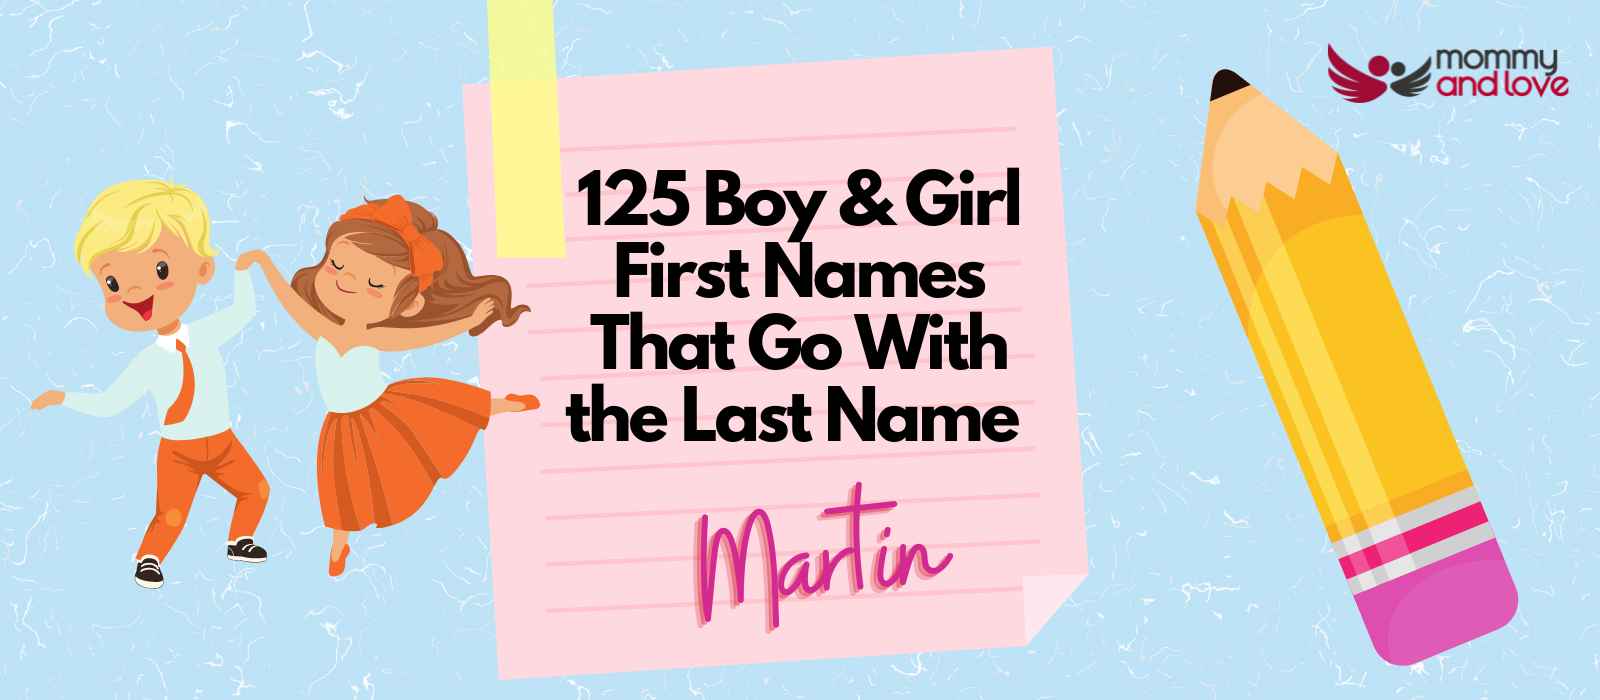 125 Boy & Girl First Names That Go With the Last Name Martin